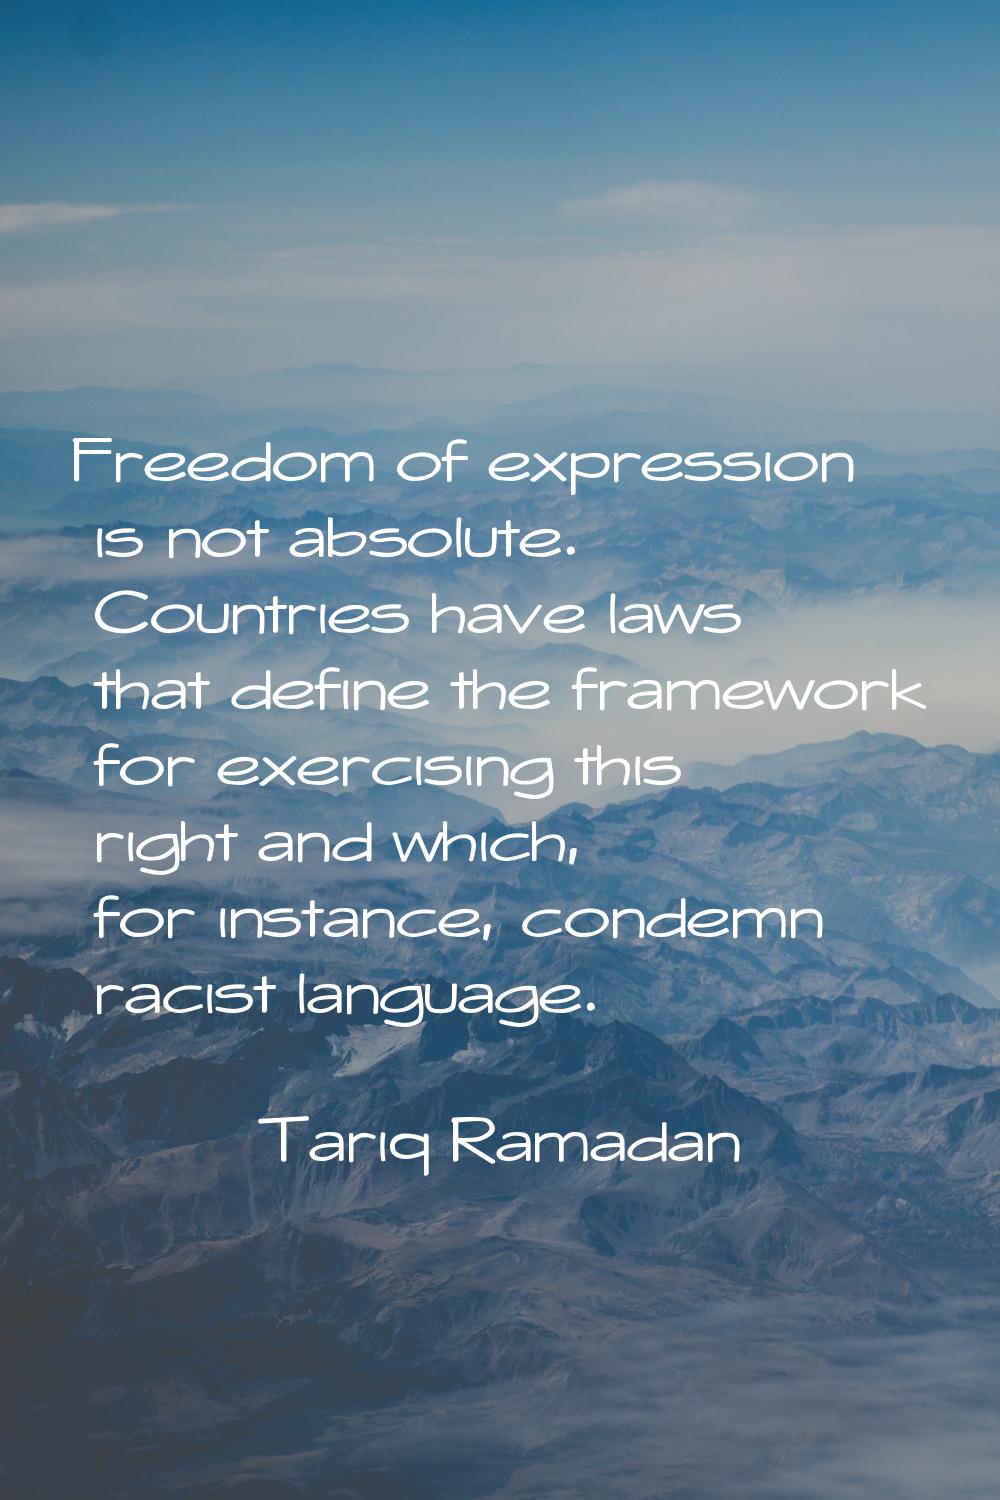 Freedom of expression is not absolute. Countries have laws that define the framework for exercising